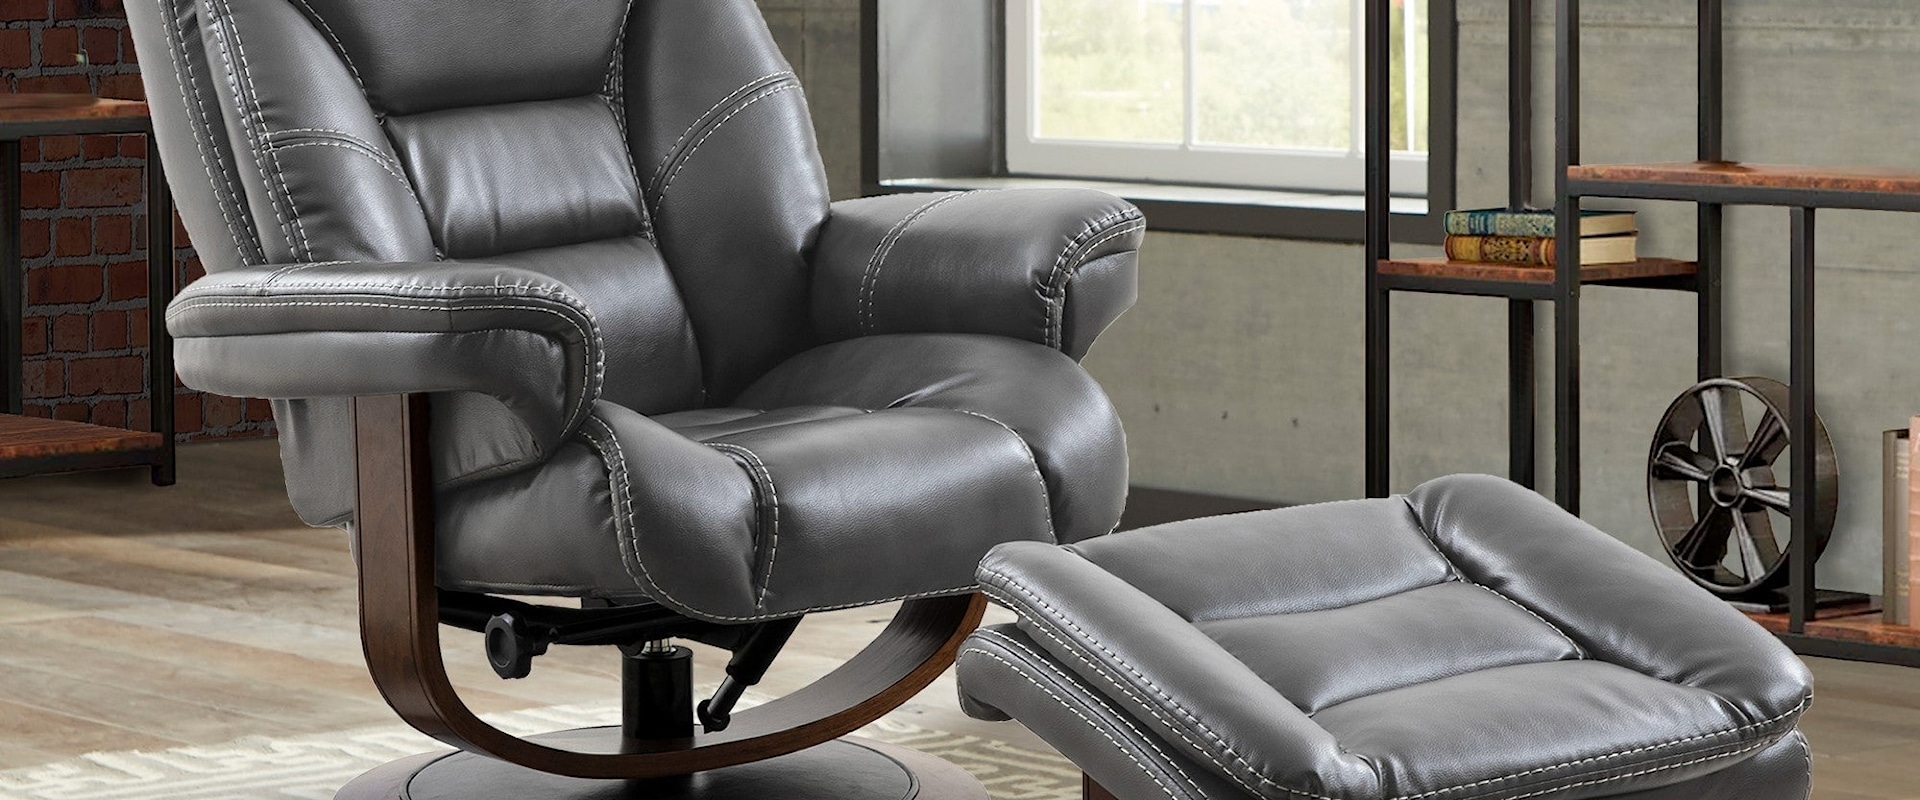 Contemporary Manual Reclining Swivel Chair and Ottoman